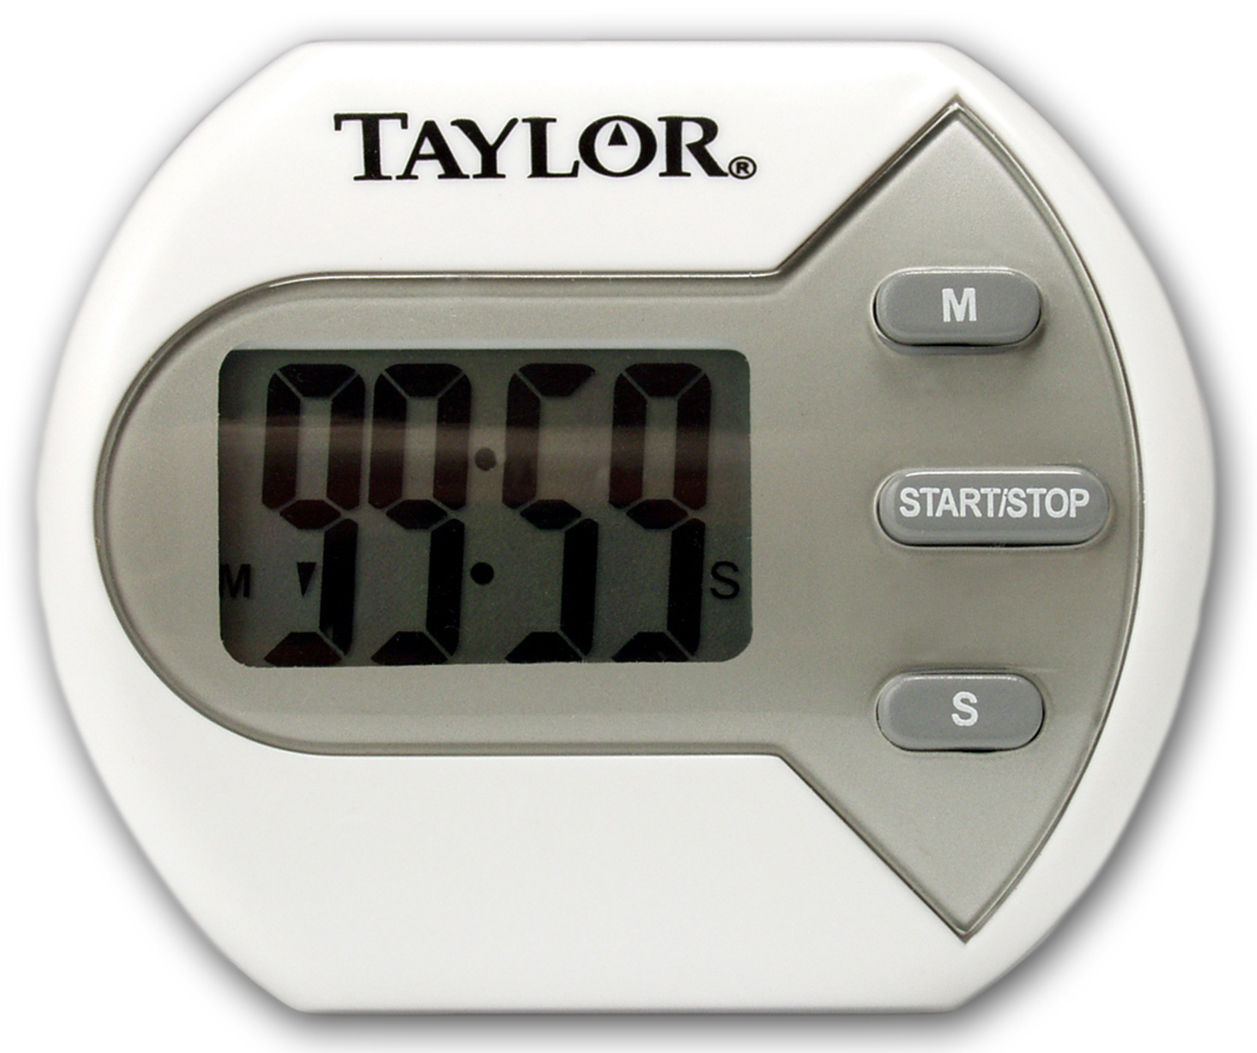 Taylor Super Loud 95DB Digital Kitchen Cooking Timer Countertop White  Silver